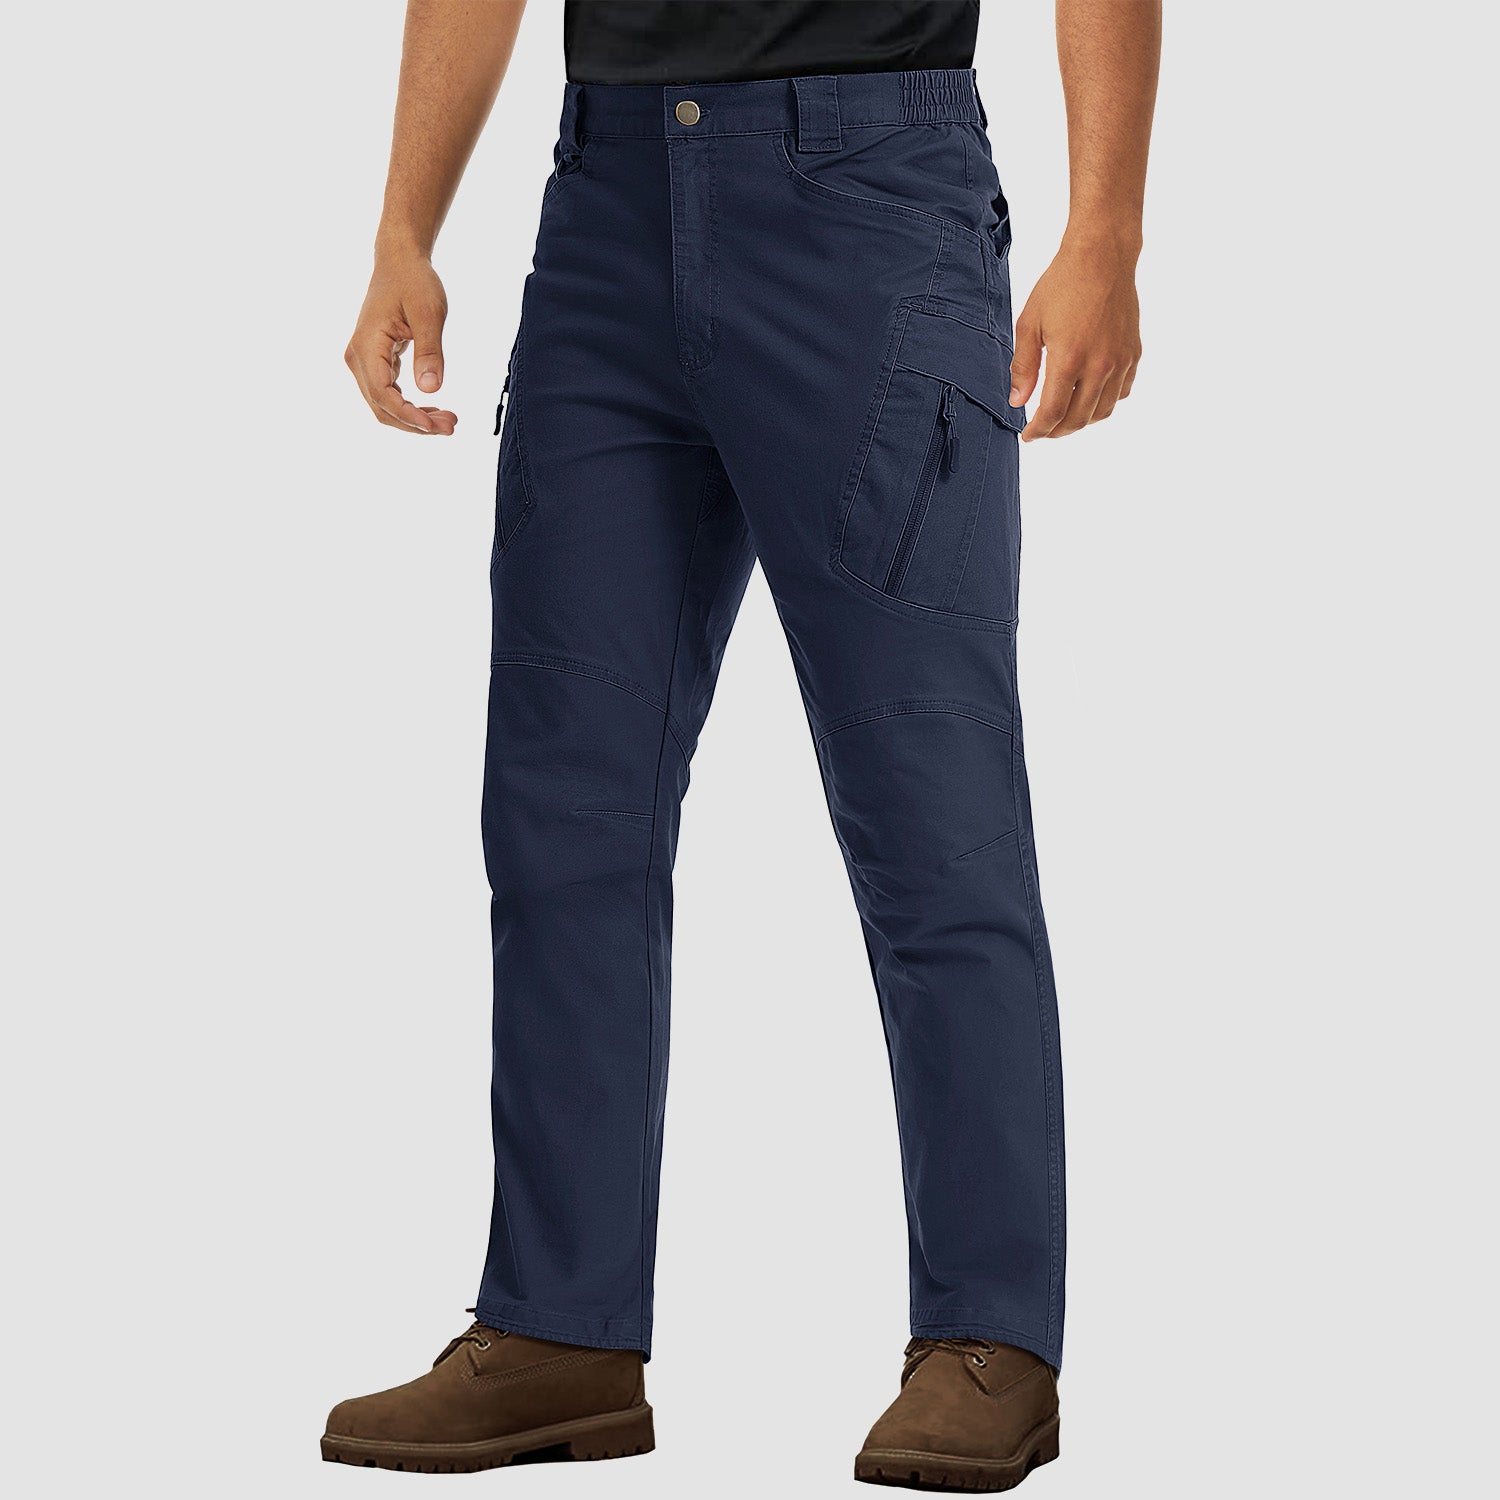 Men's Tactical Pants with 9 Pockets Rip-Stop Lightweight Work Cargo Pants